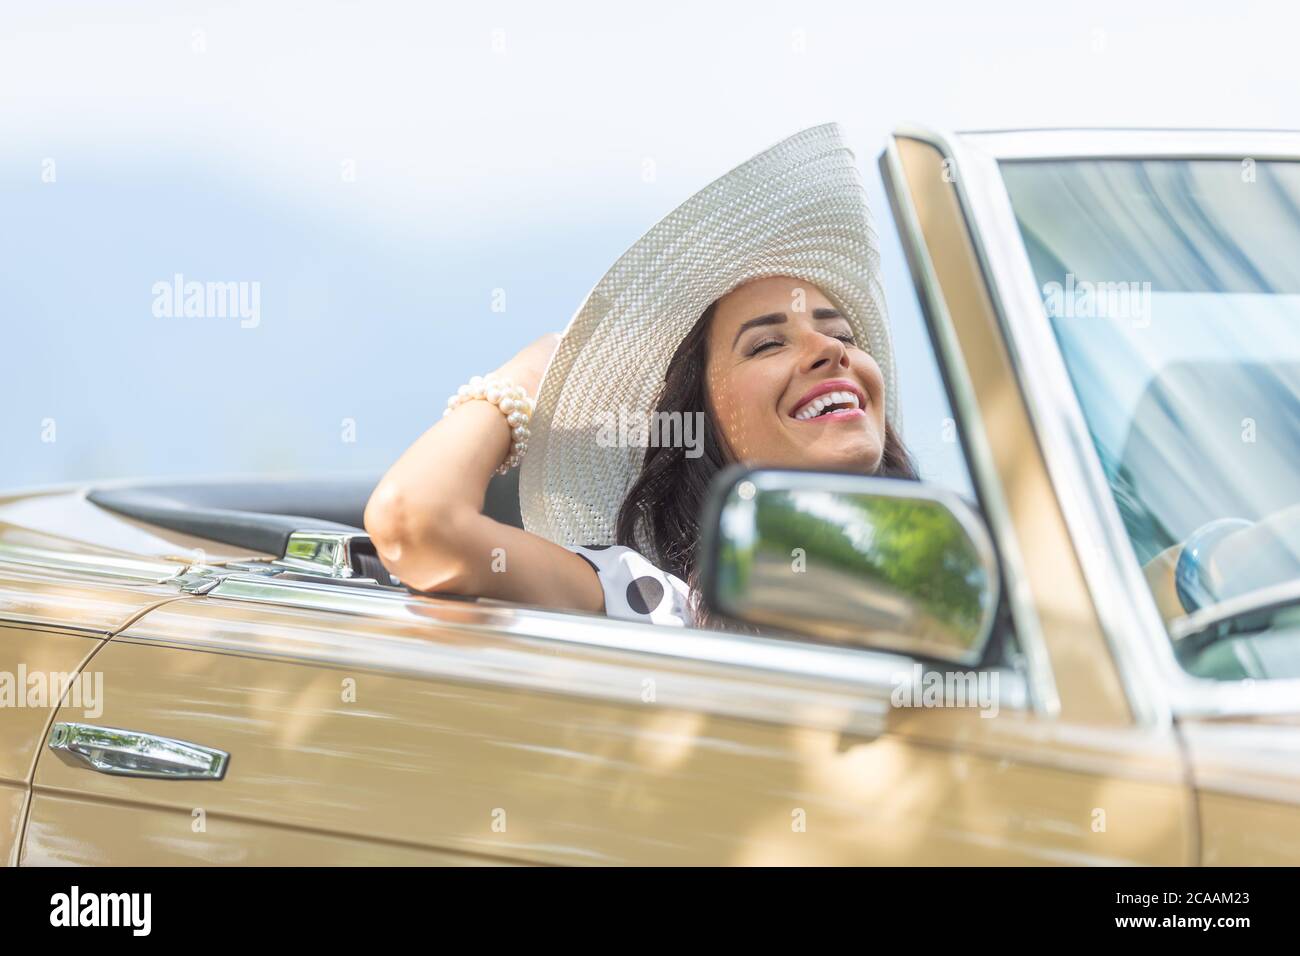 Right-handed female driver with eyes closed, head tilted backwards holds her hat and enjoys the summer cabiolet drive. Stock Photo